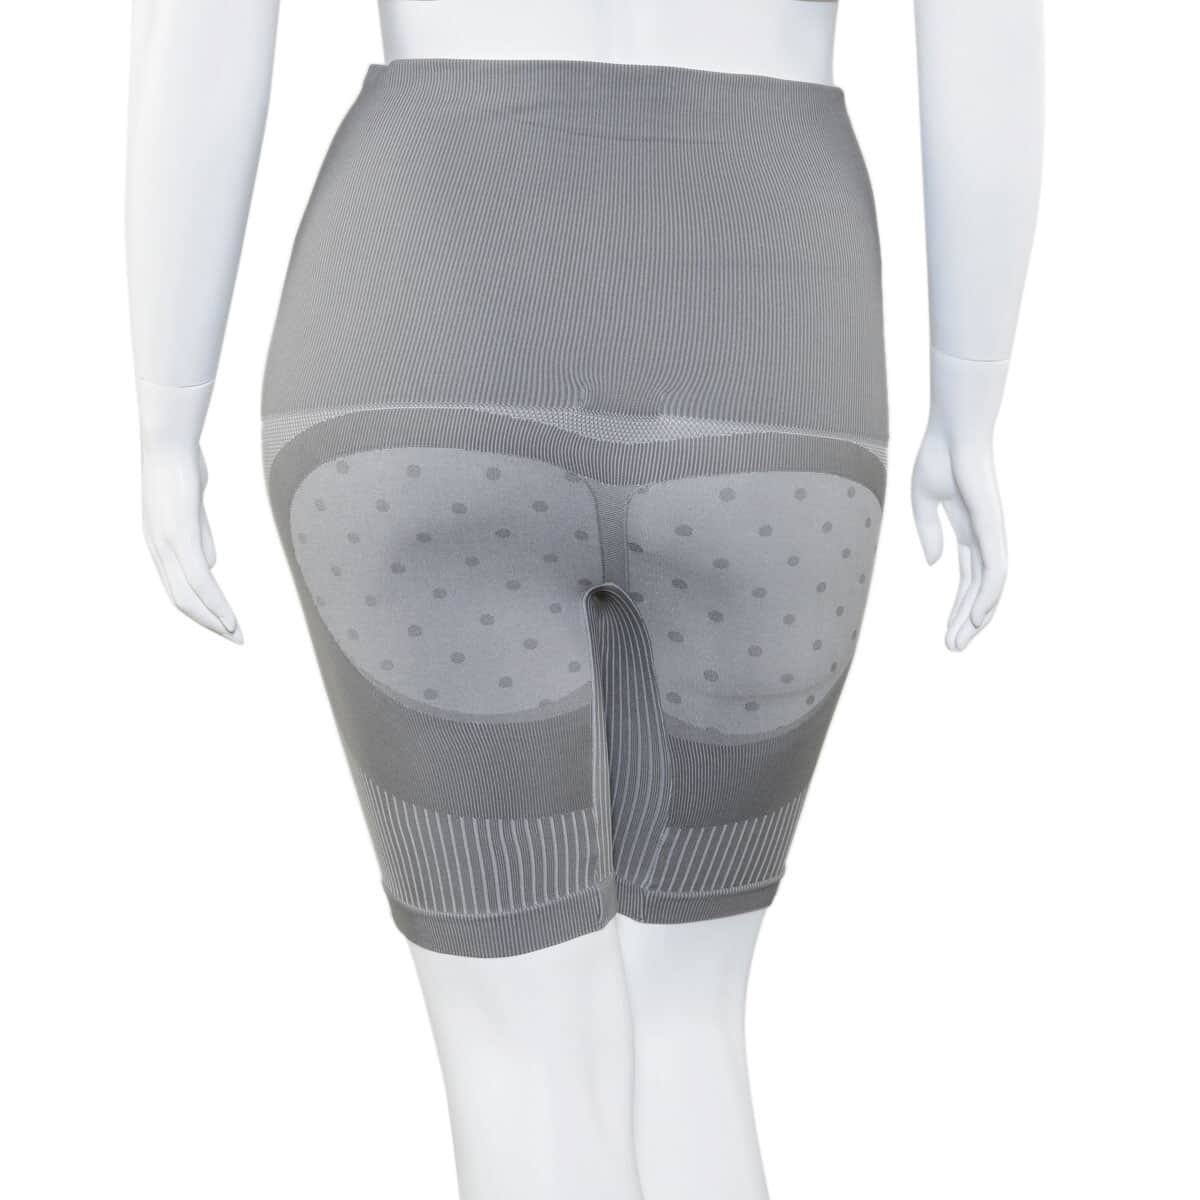 SANKOM Patent Mid-Thigh Shaper with Bamboo Fibers - XXL | Gray  image number 3